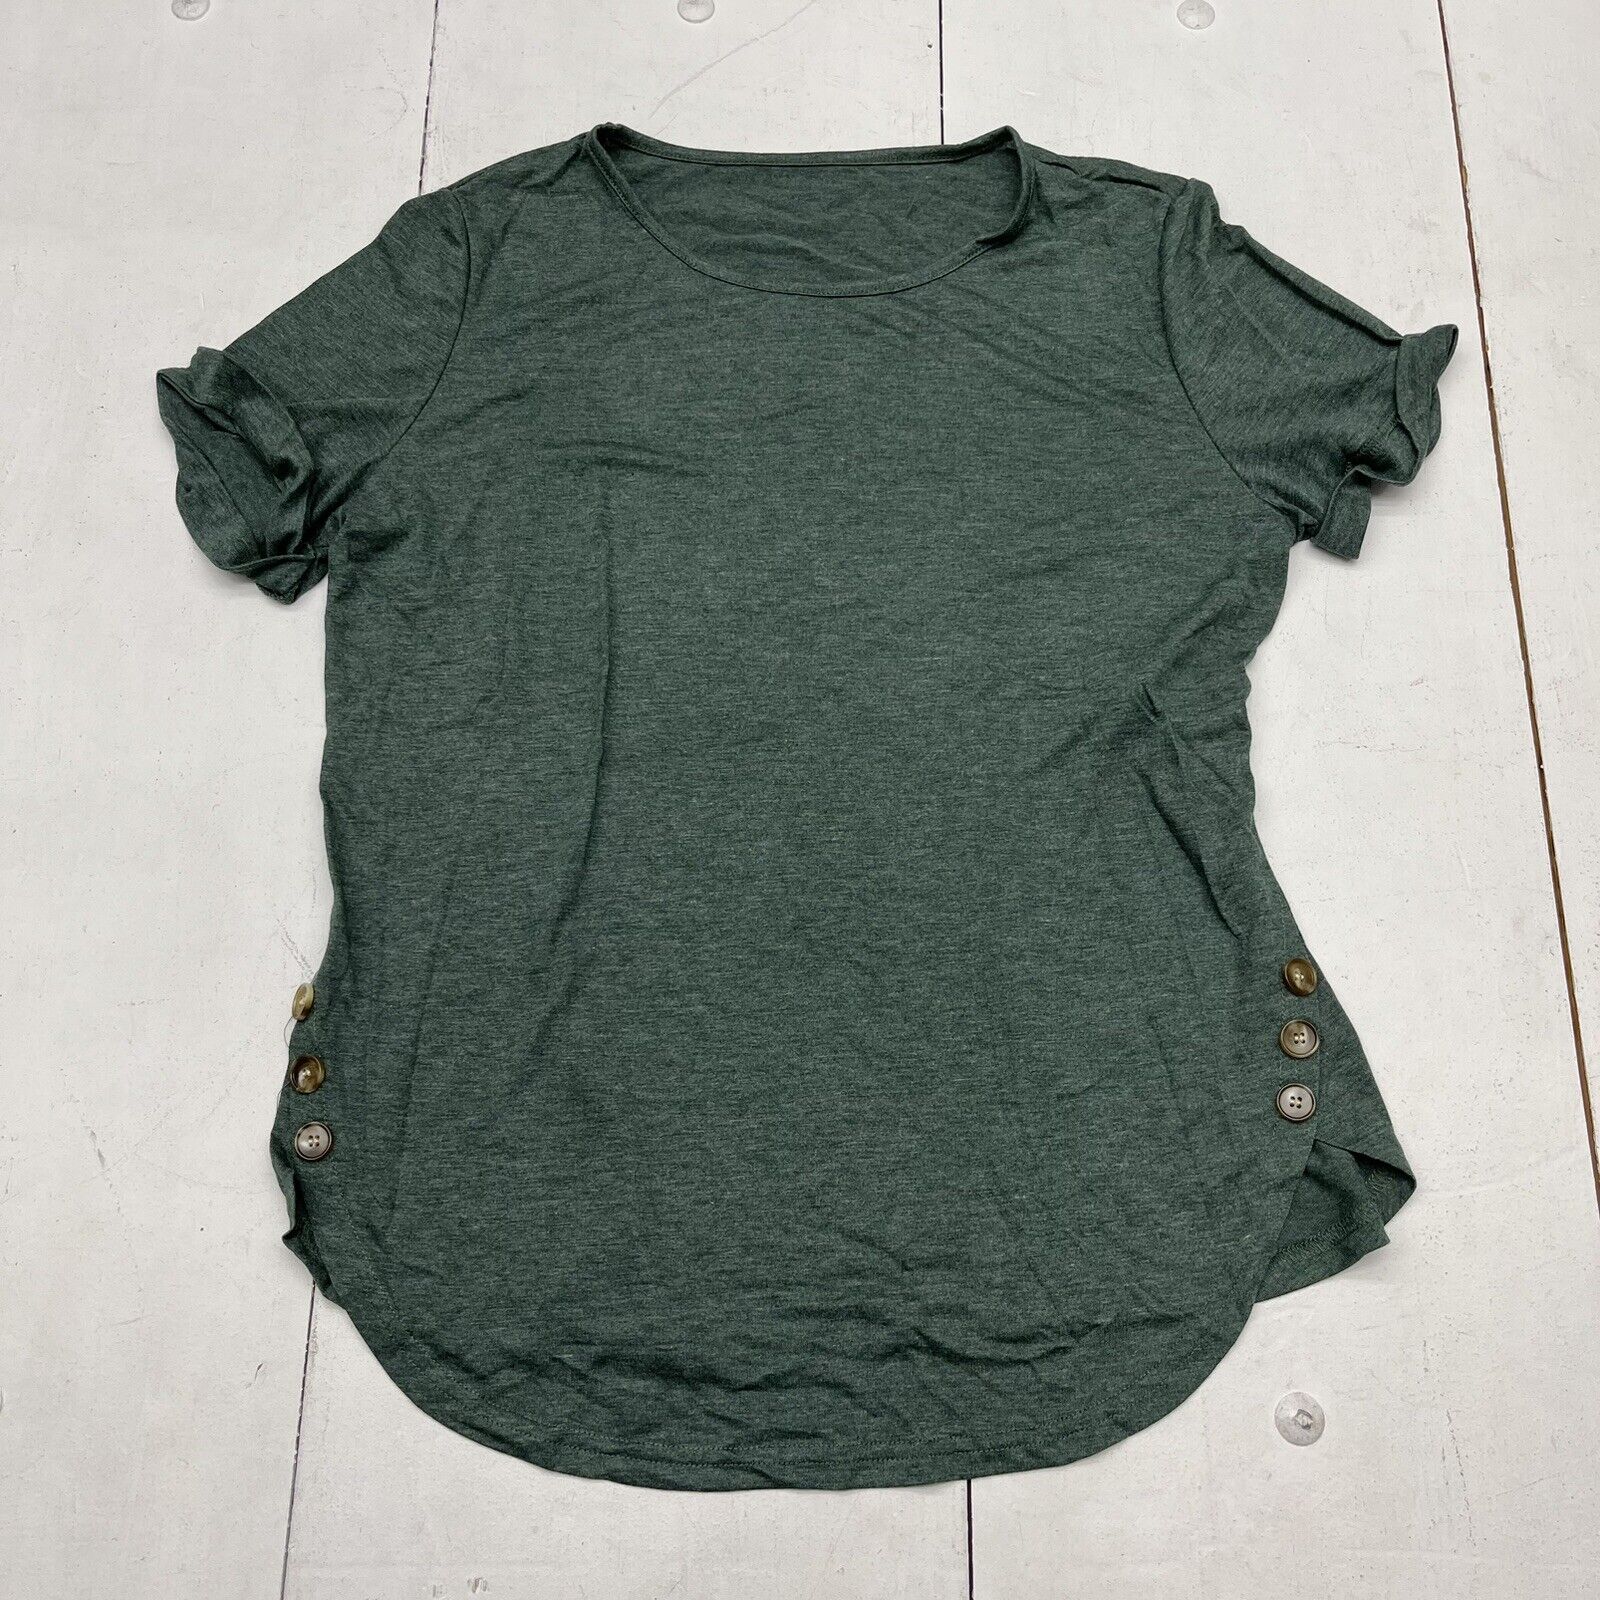 Shein Green Basic T-Shirt With Buttons Women’s Size X-Large NEW